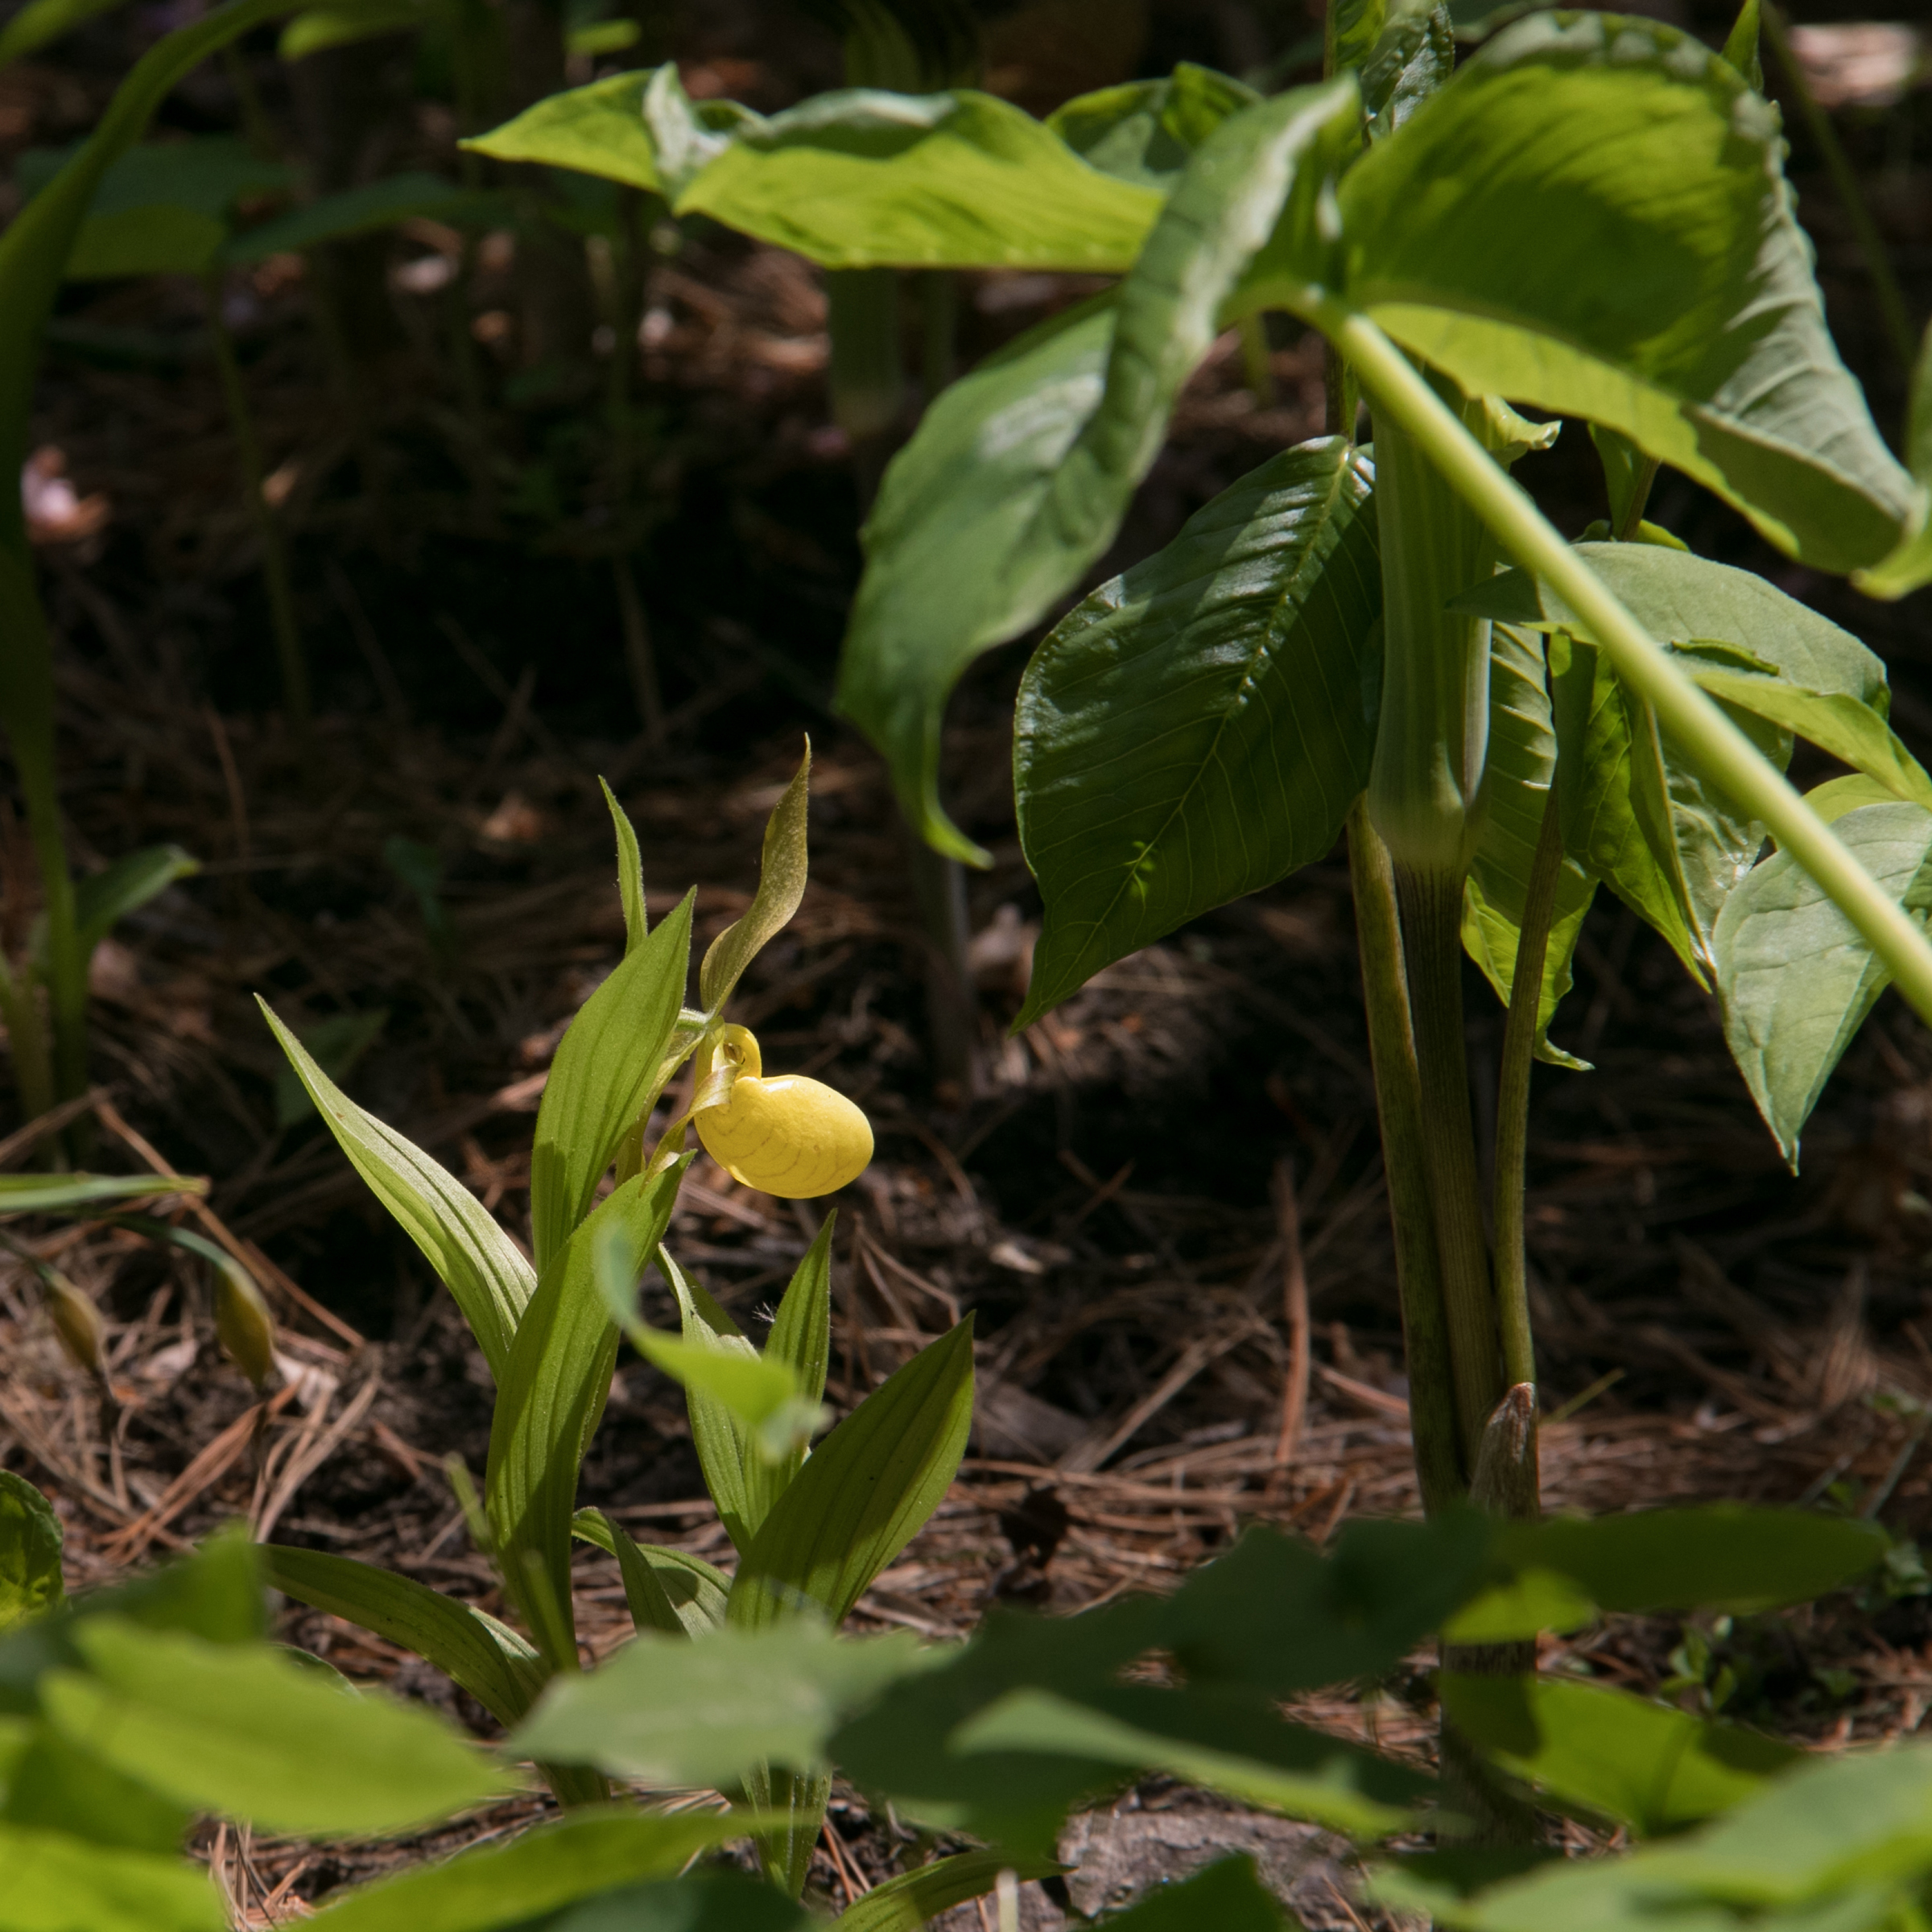 Cypripedium parviflorum var. pubescens, known as the large yellow lady’s slipper is one of the native orchids that Dr. Peter Zale from Longwood Gardens is working to preserve in consort with the Pennsylvania Plant Conservation Network, part of the Pennsylvania Department of Conservation and Natural Resource’s Bureau of Forestry.